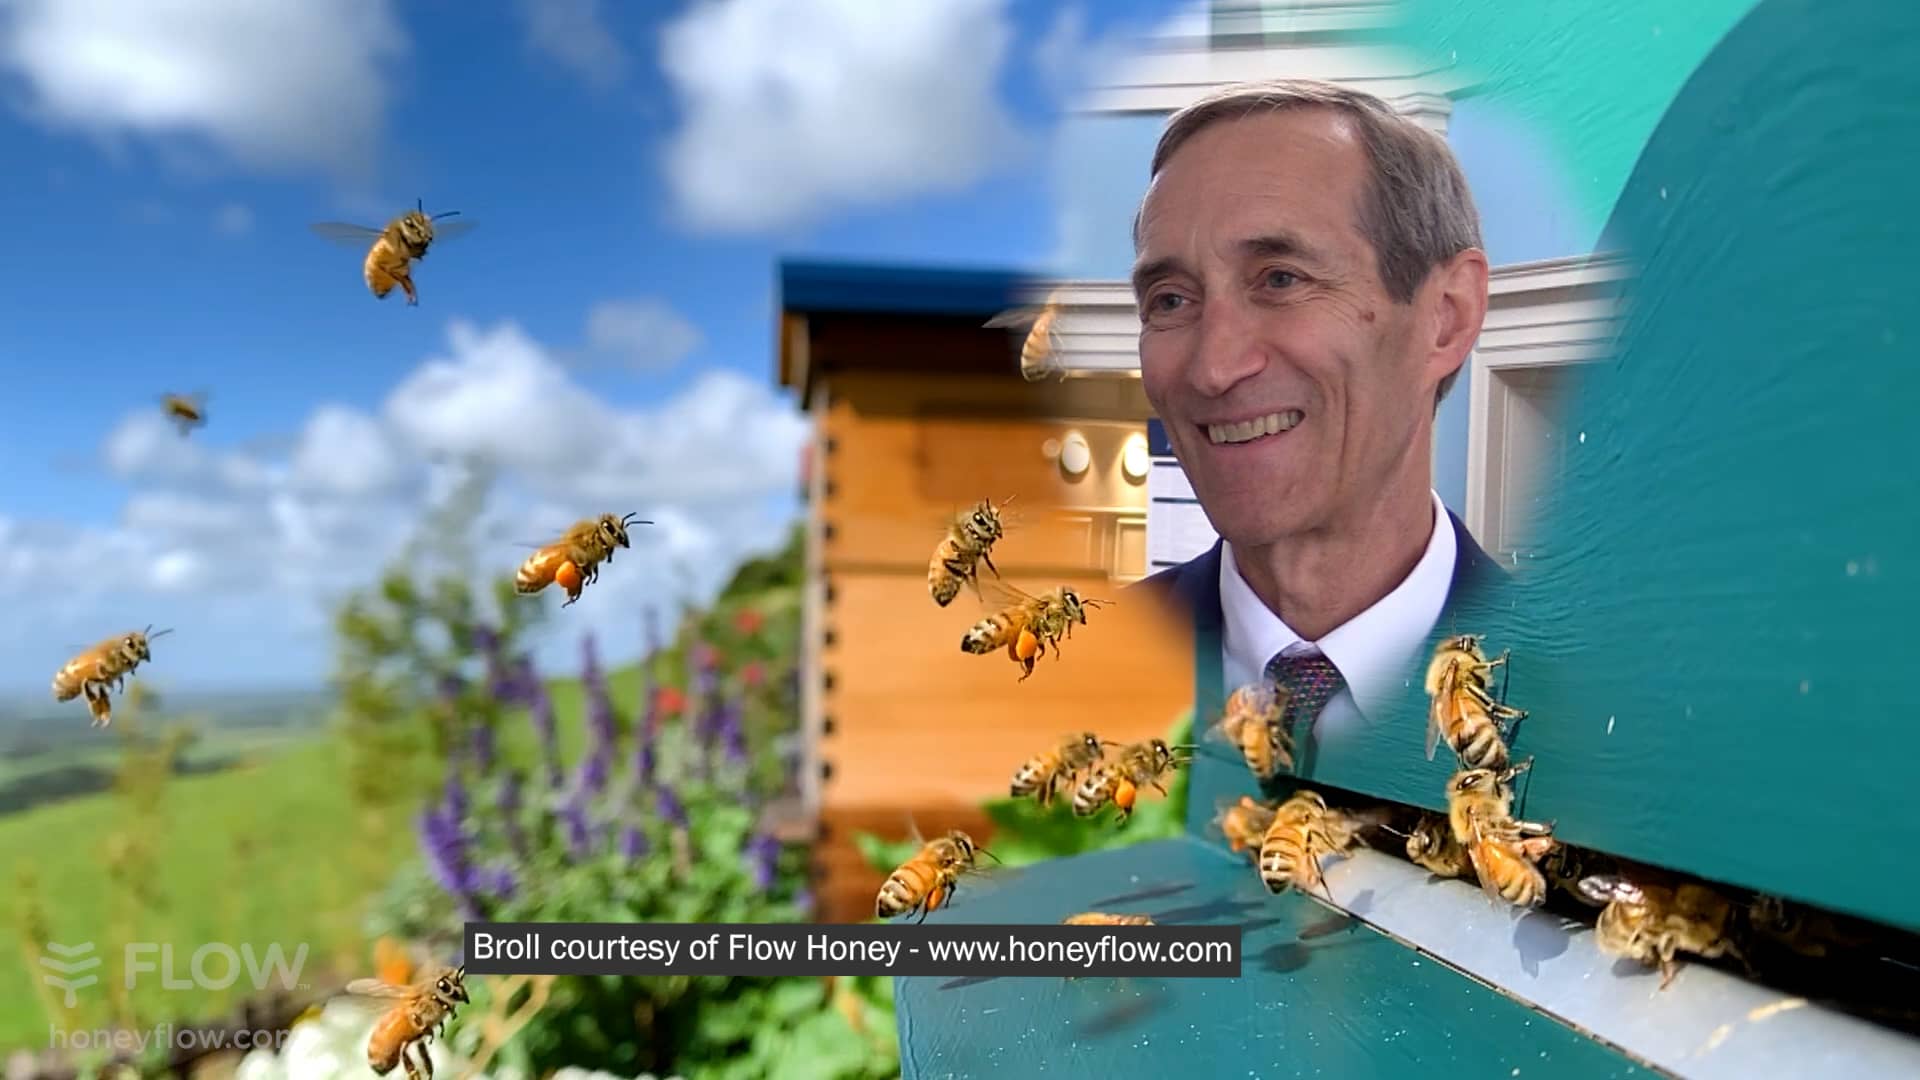 Bob Gessner has a hobby that helps the pollinators.